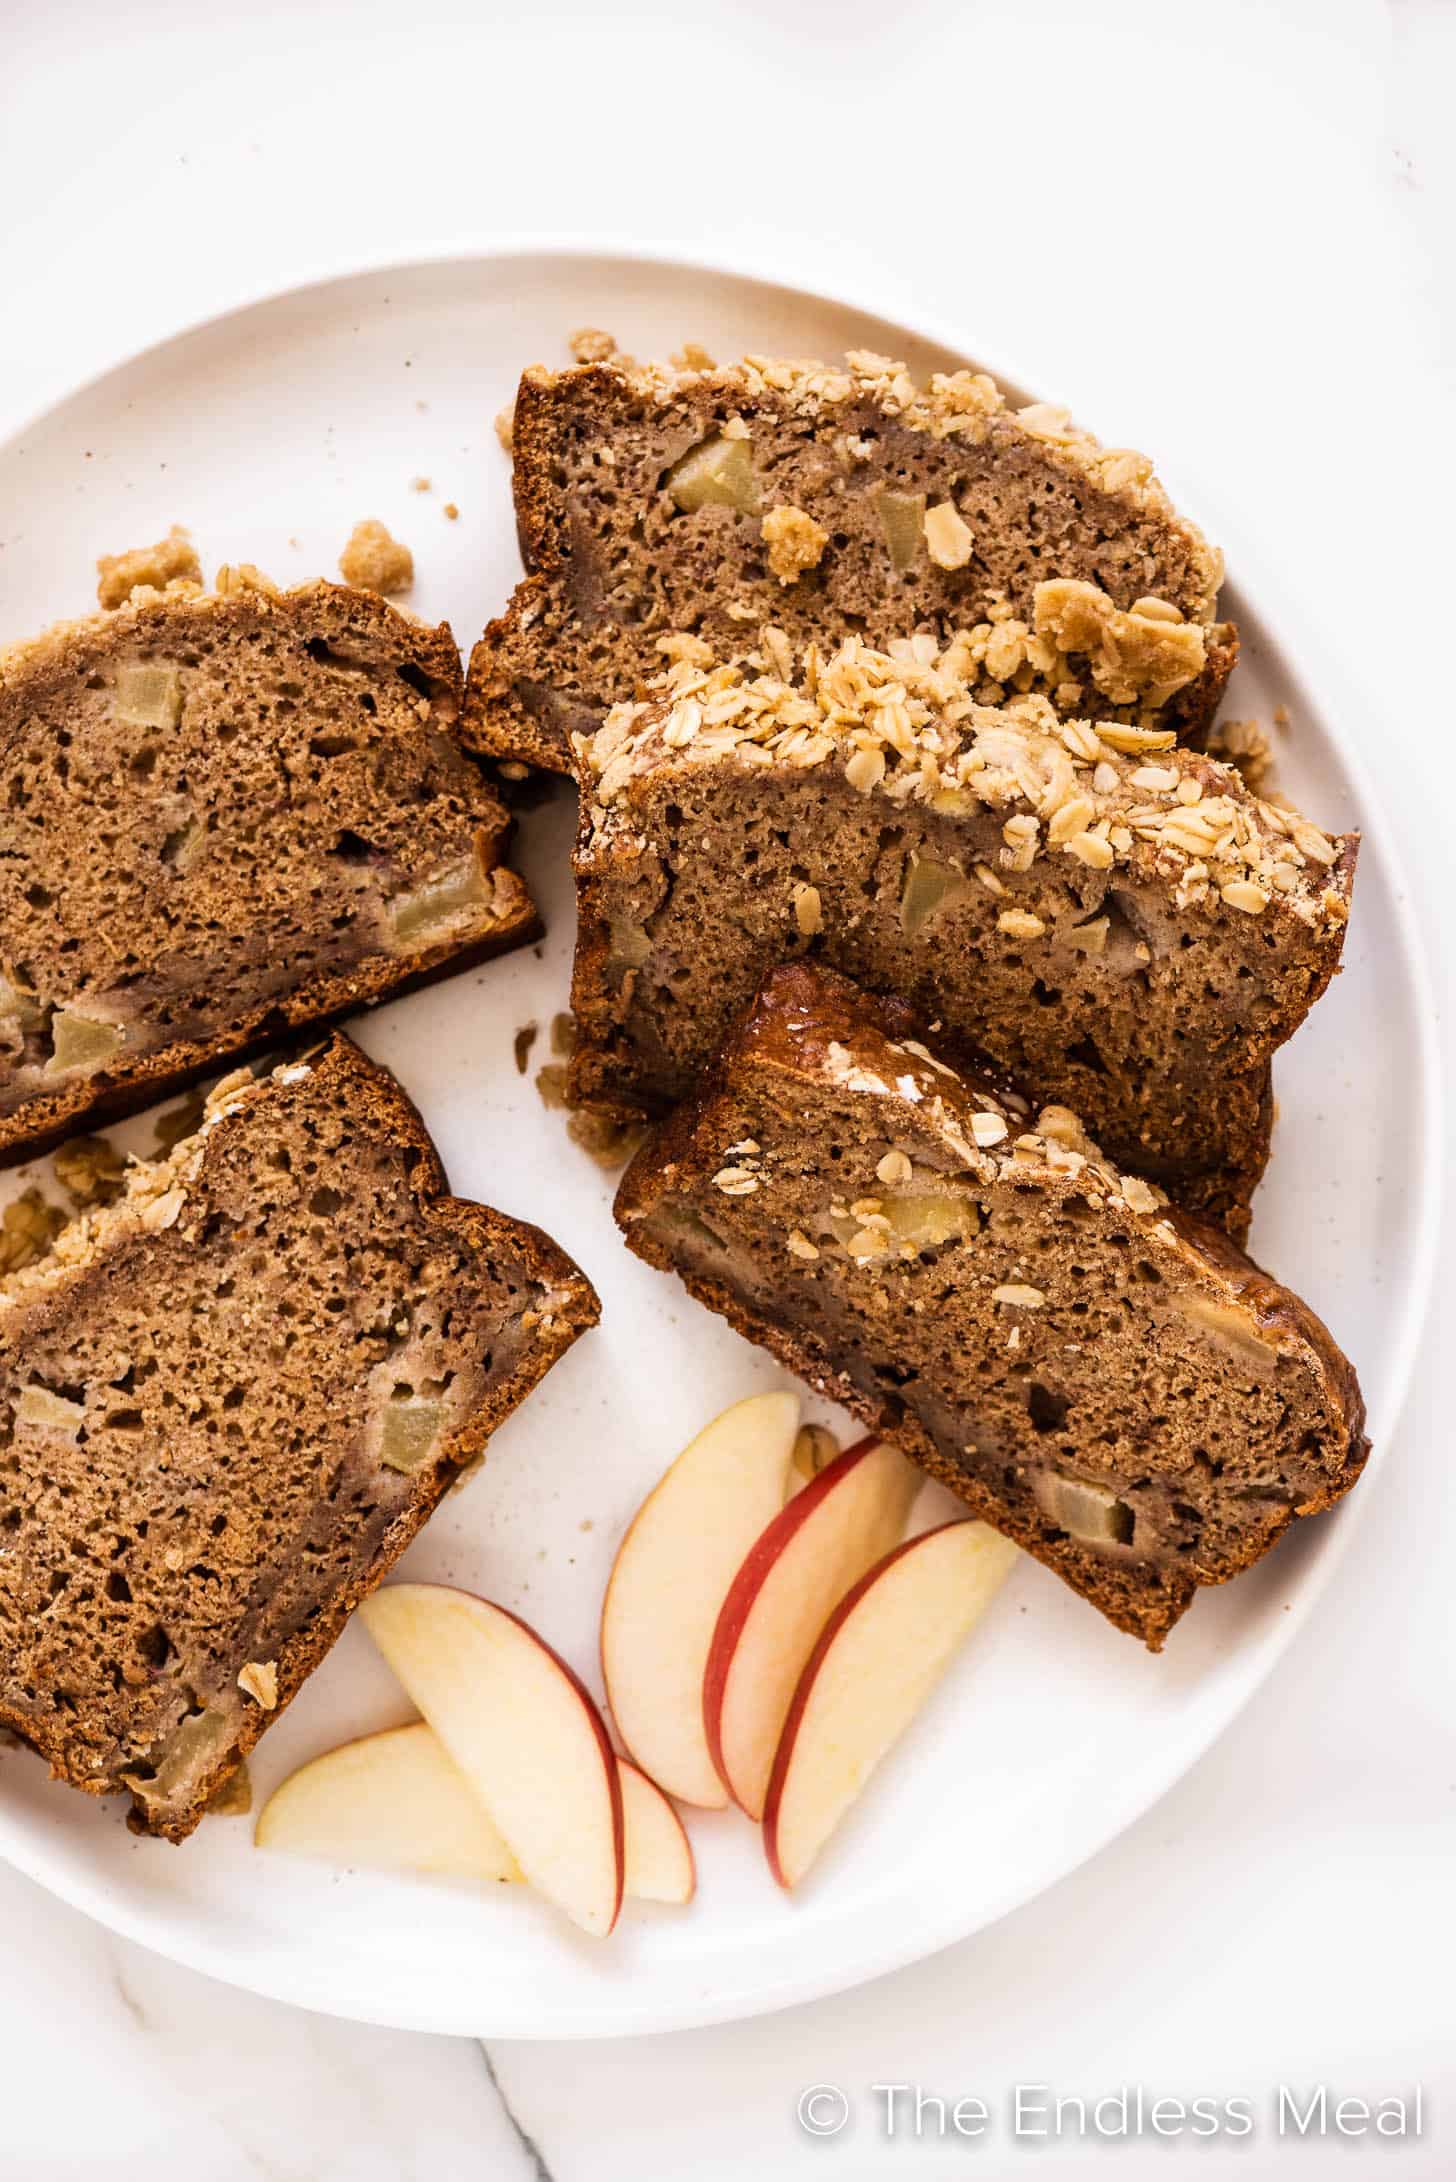 slices of Apple Banana Bread on a plate